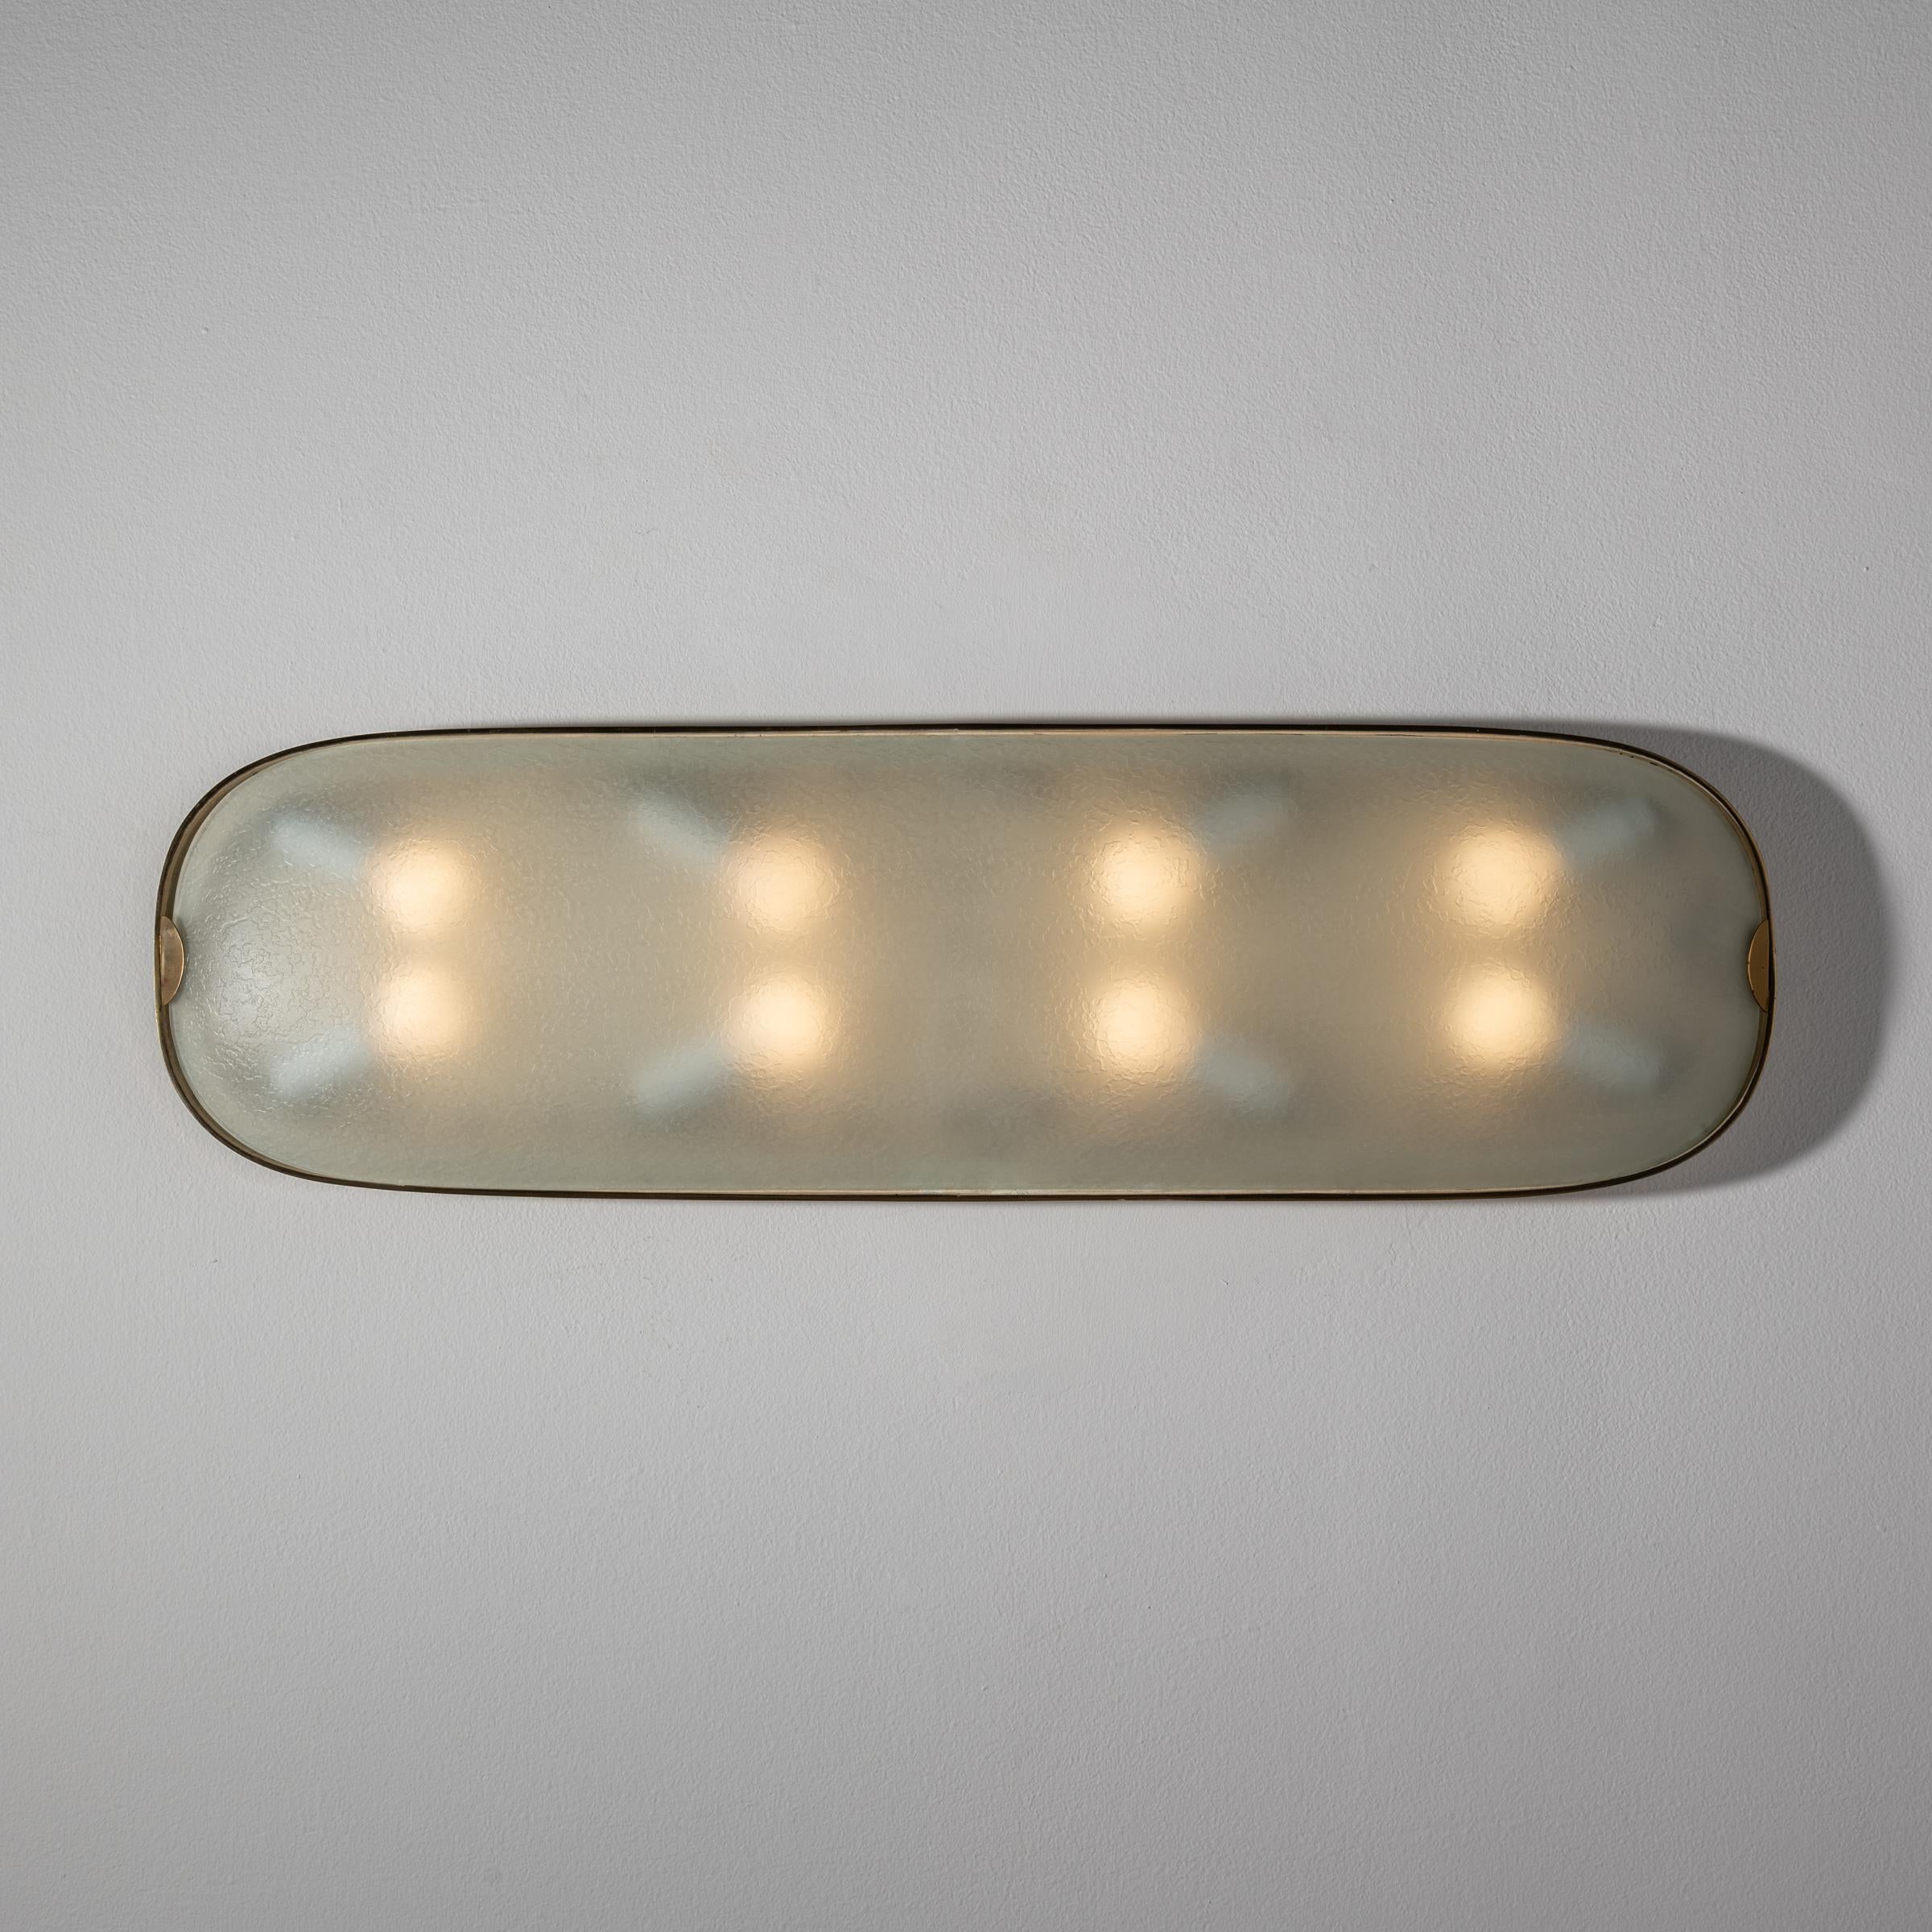 Large and rare flush mount wall/ceiling light by Fontana Arte. Designed and manufactured in Italy, circa 1950's. Wired for U.S. standards. 
We recommend Lamping: 120v 8Qty E14 Sockets 25w frosted bulbs, lightbulbs not included.